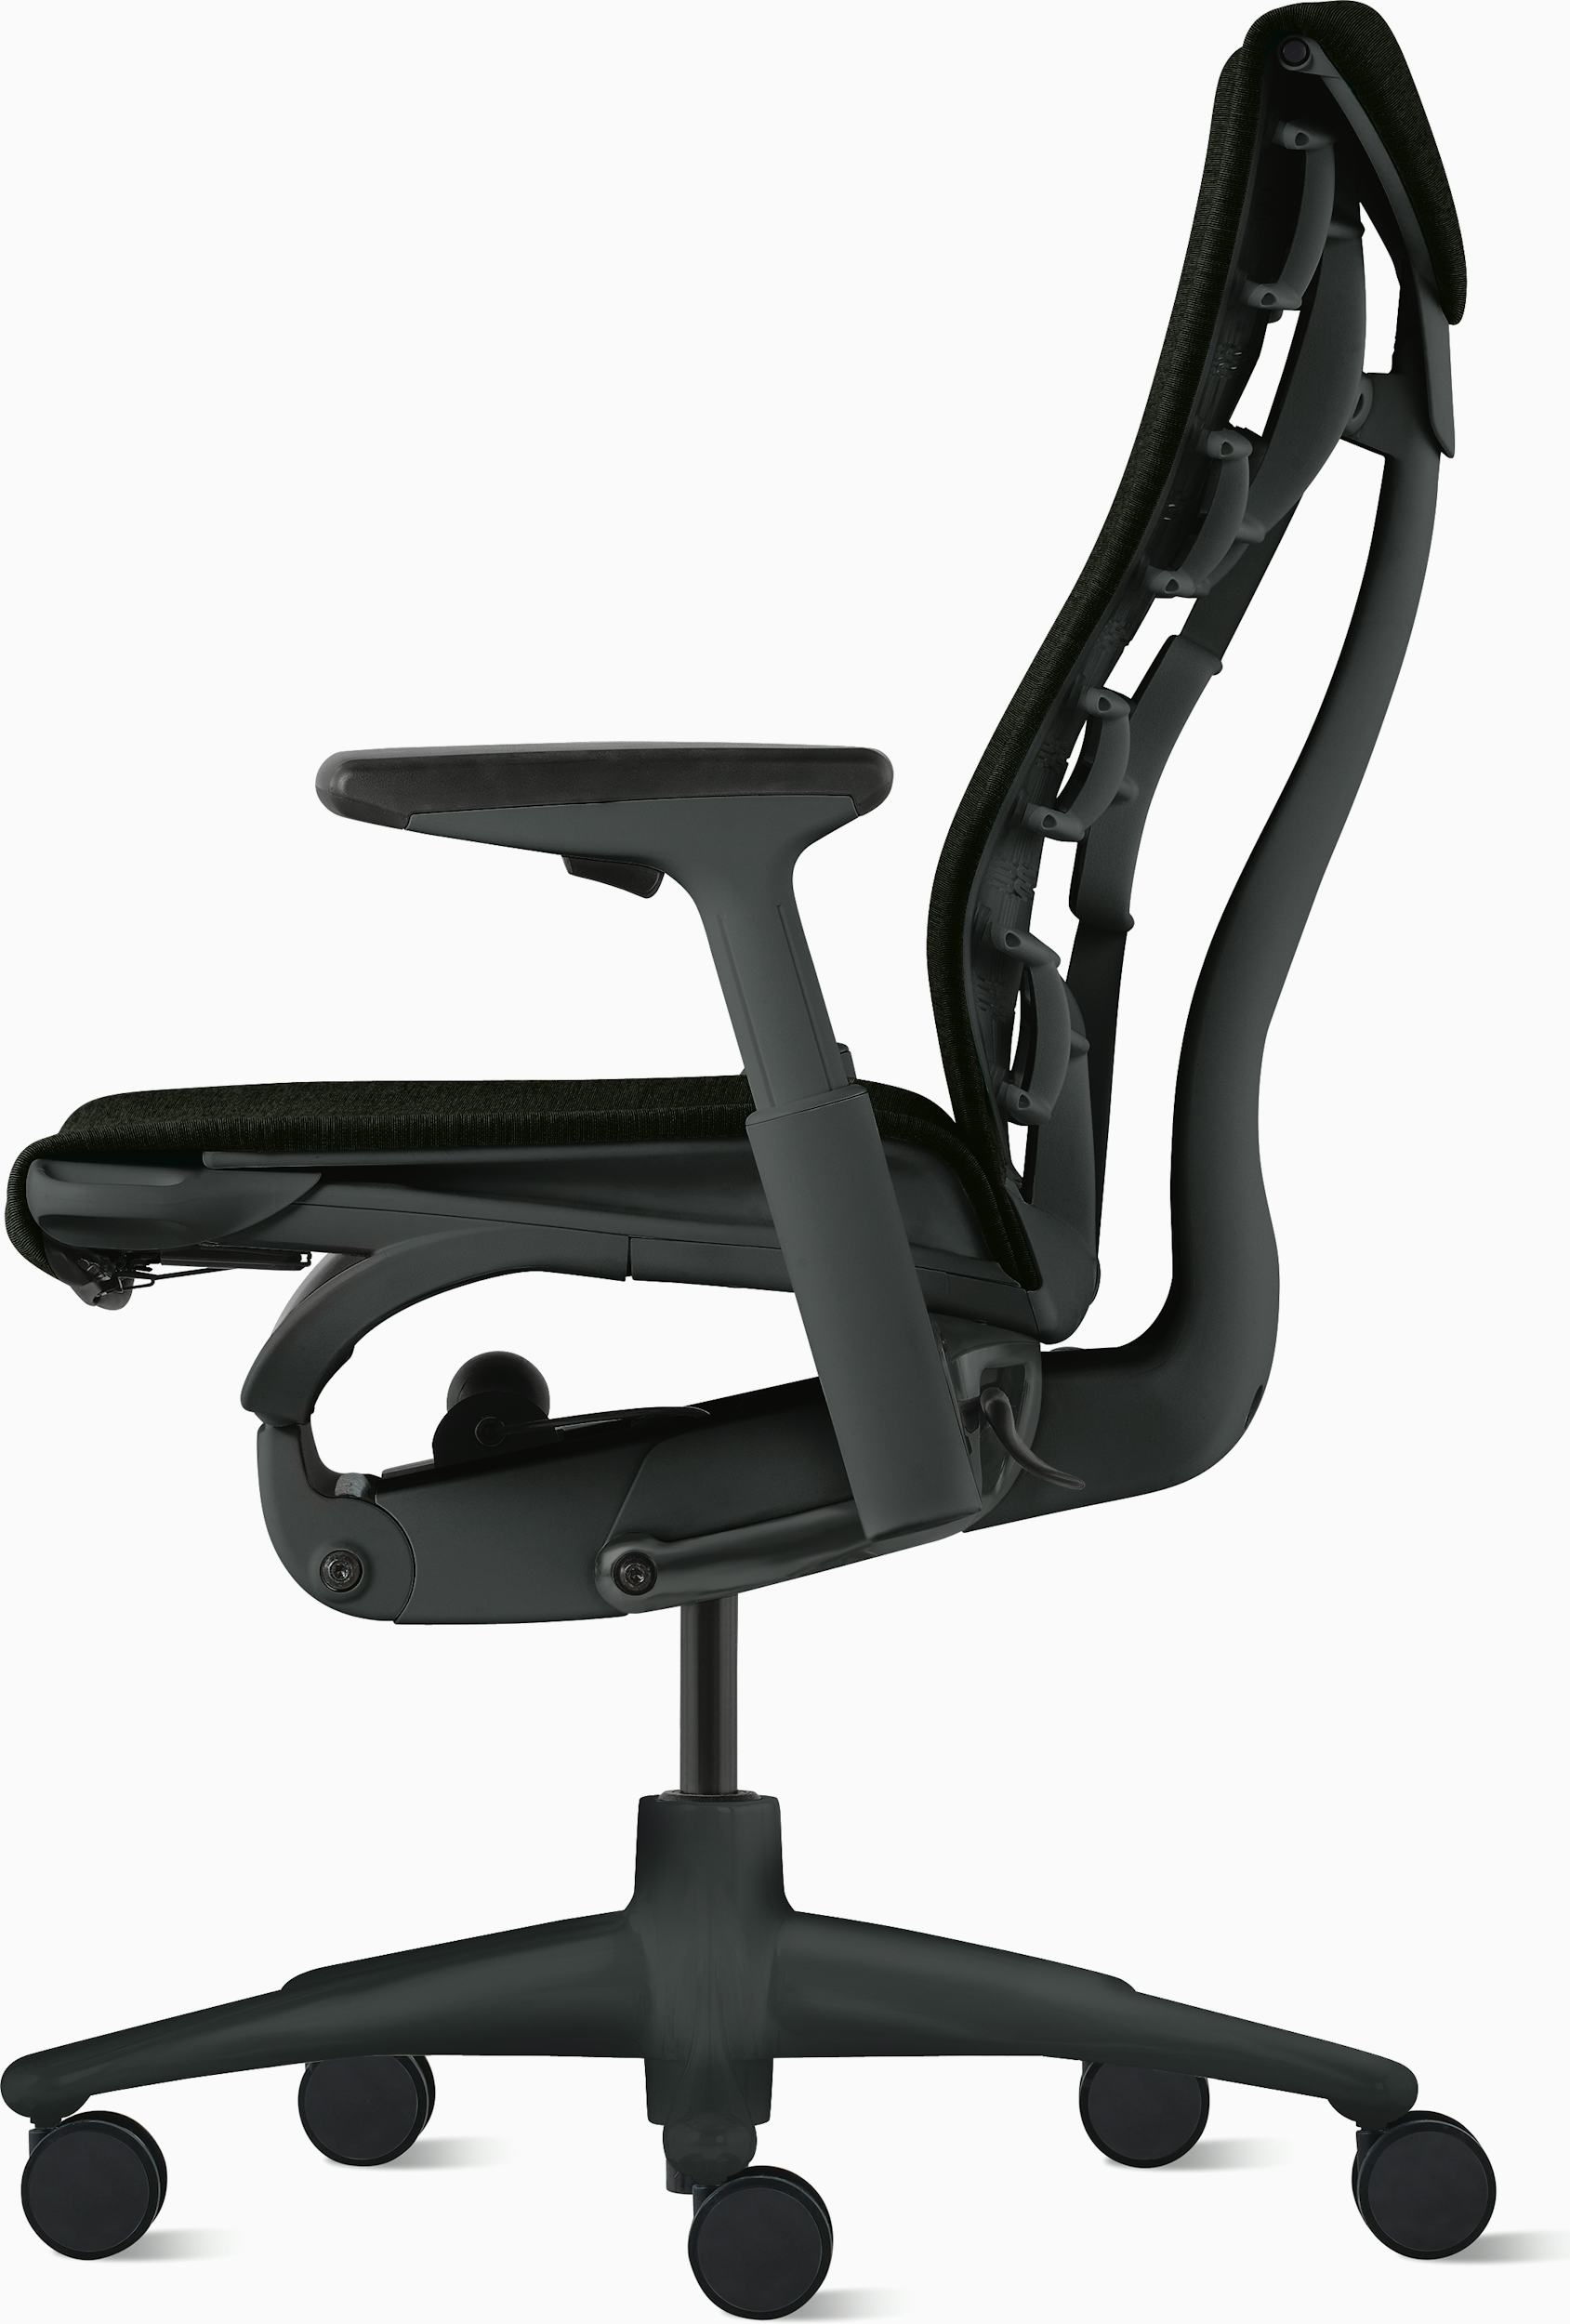 Buy Best Posture Correction Chair At The Best Price